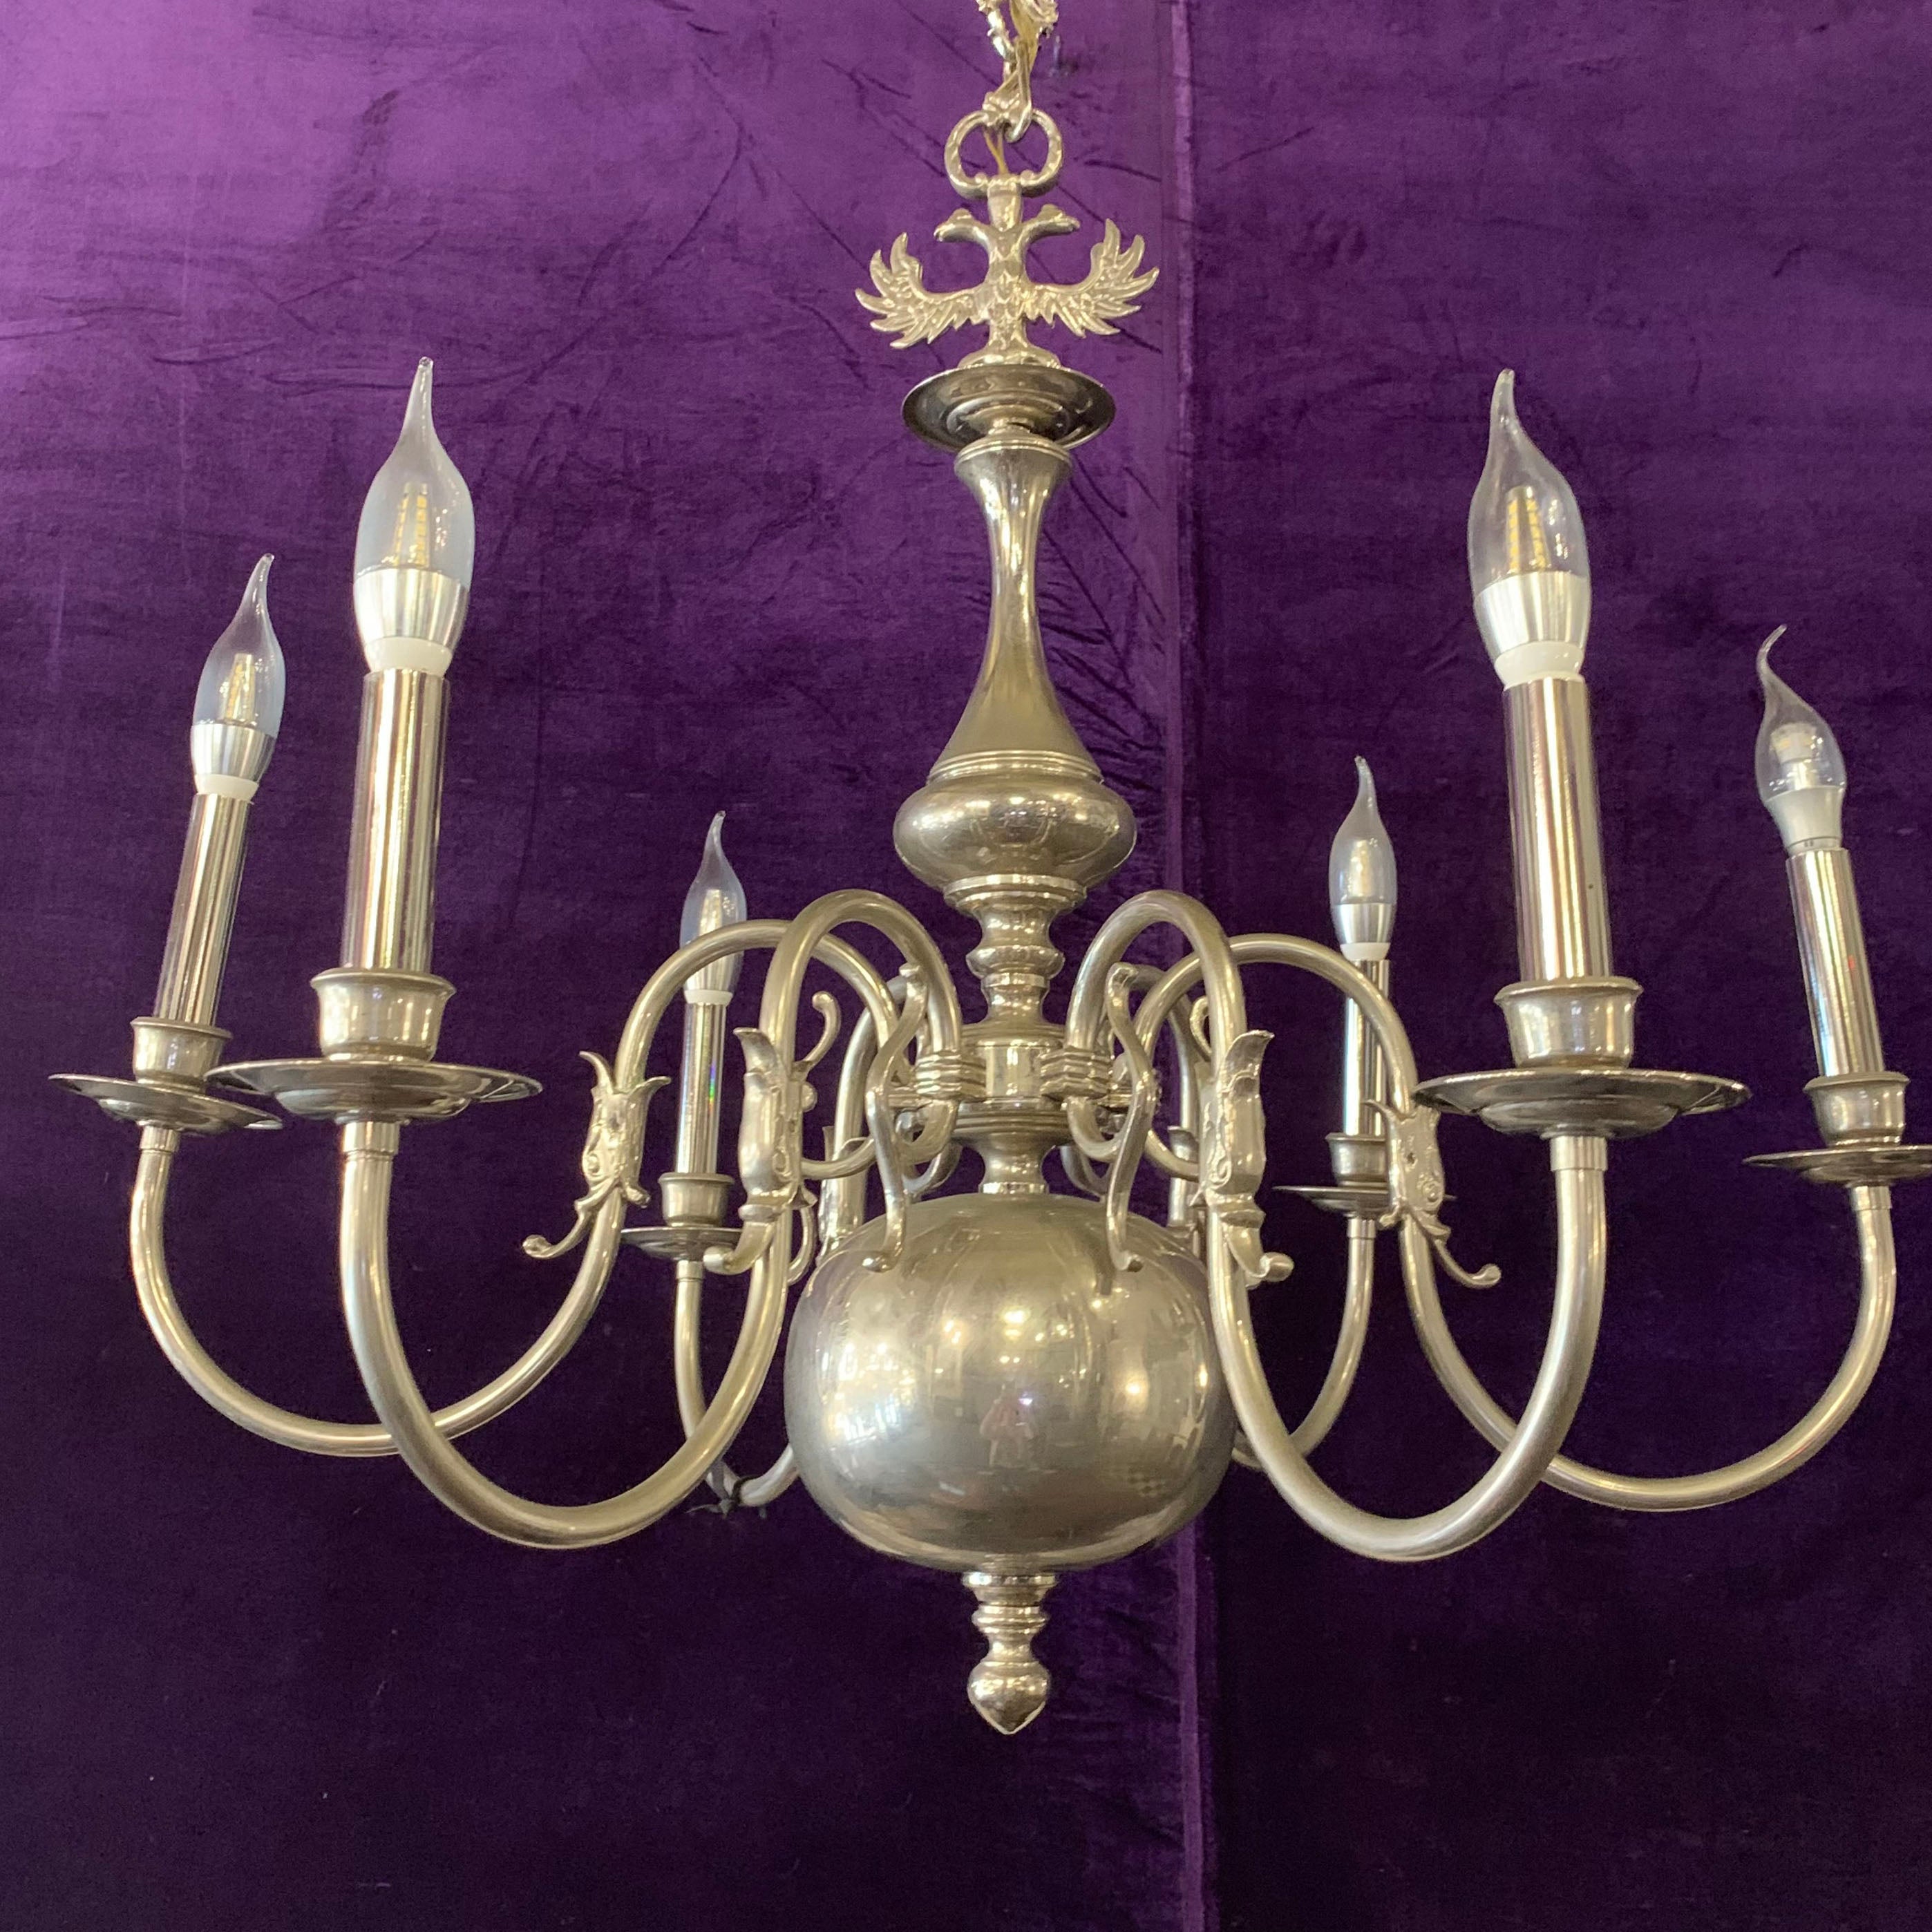 Antique Polished Nickel Flemish Chandelier with Fish Detail